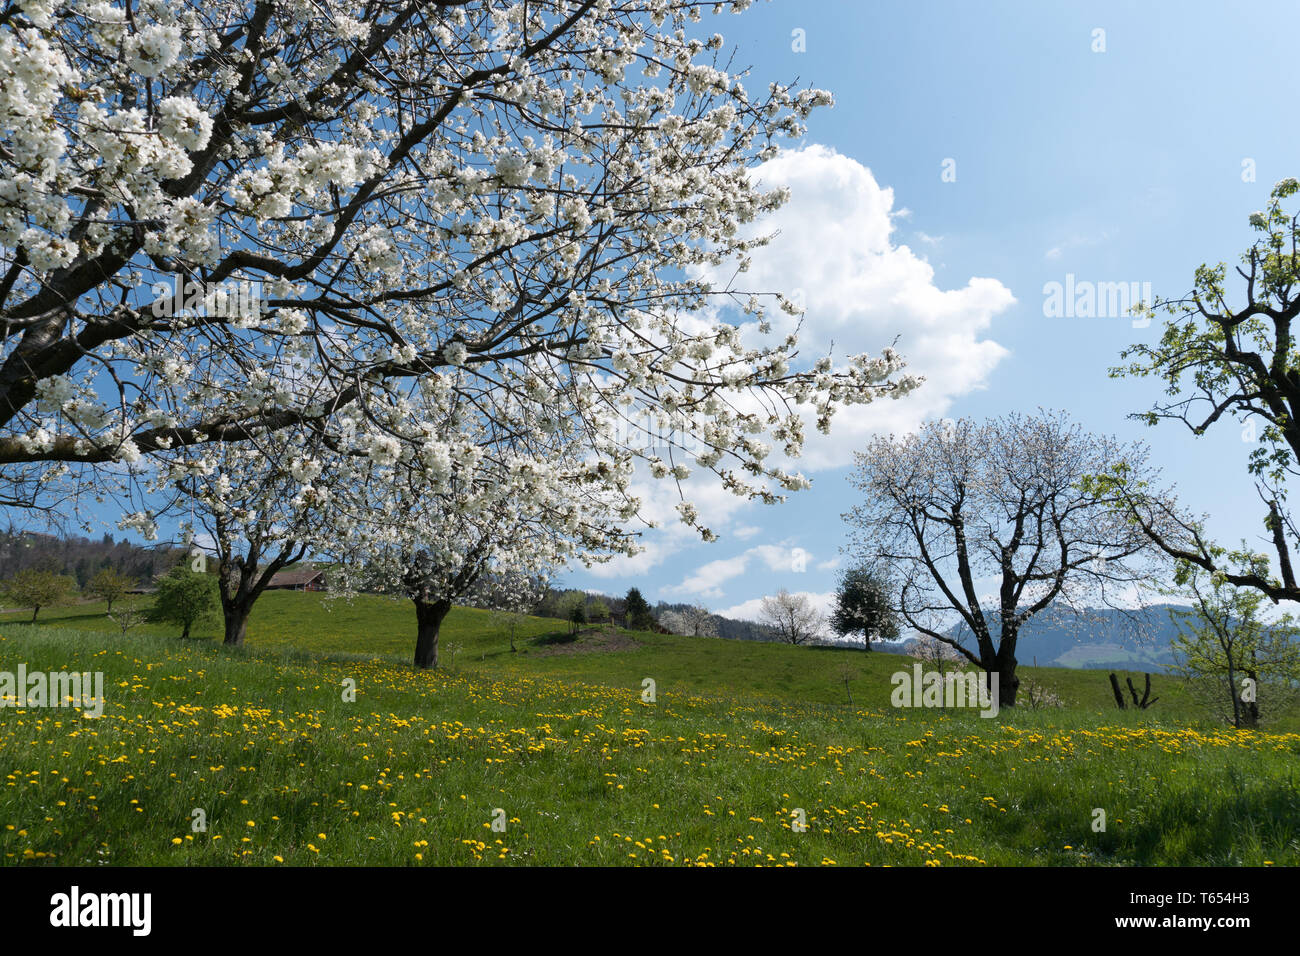 Canton Zug High Resolution Stock Photography and Images - Alamy